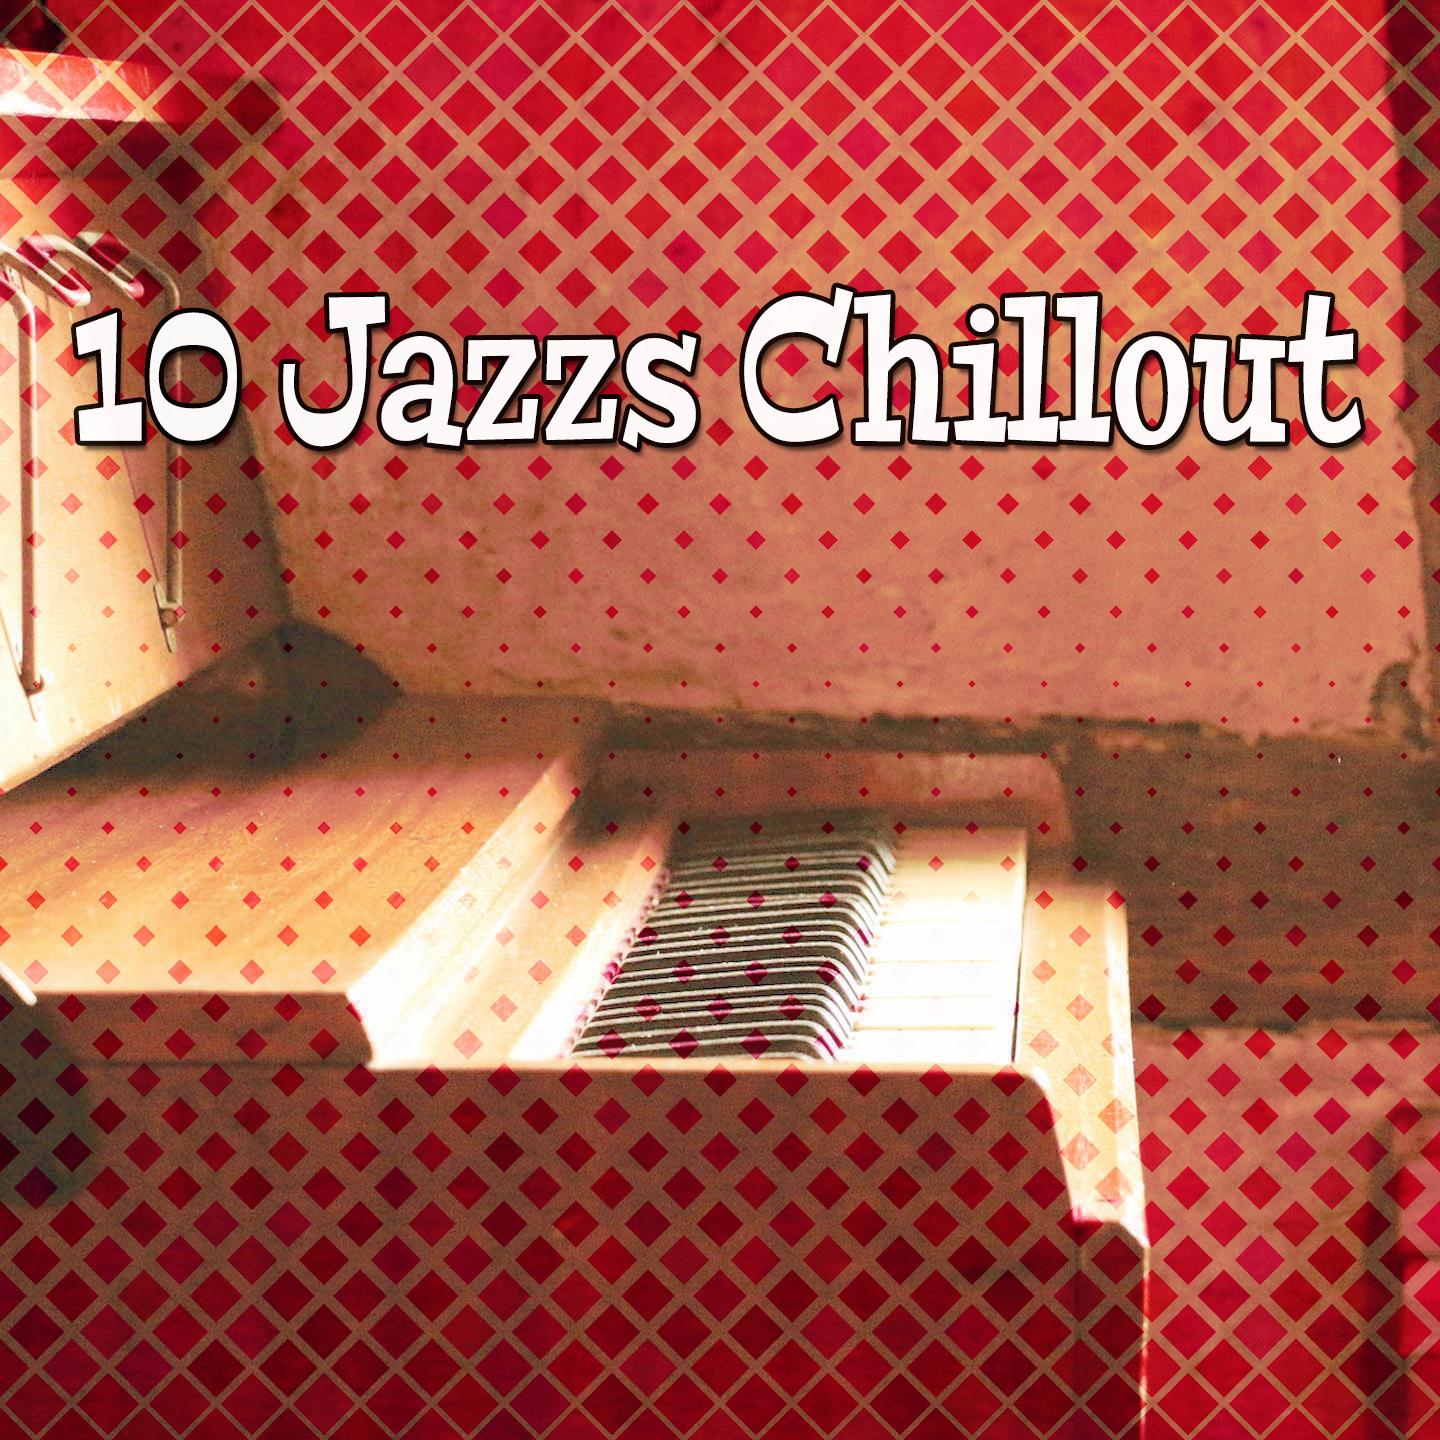 10 Jazzs Chillout